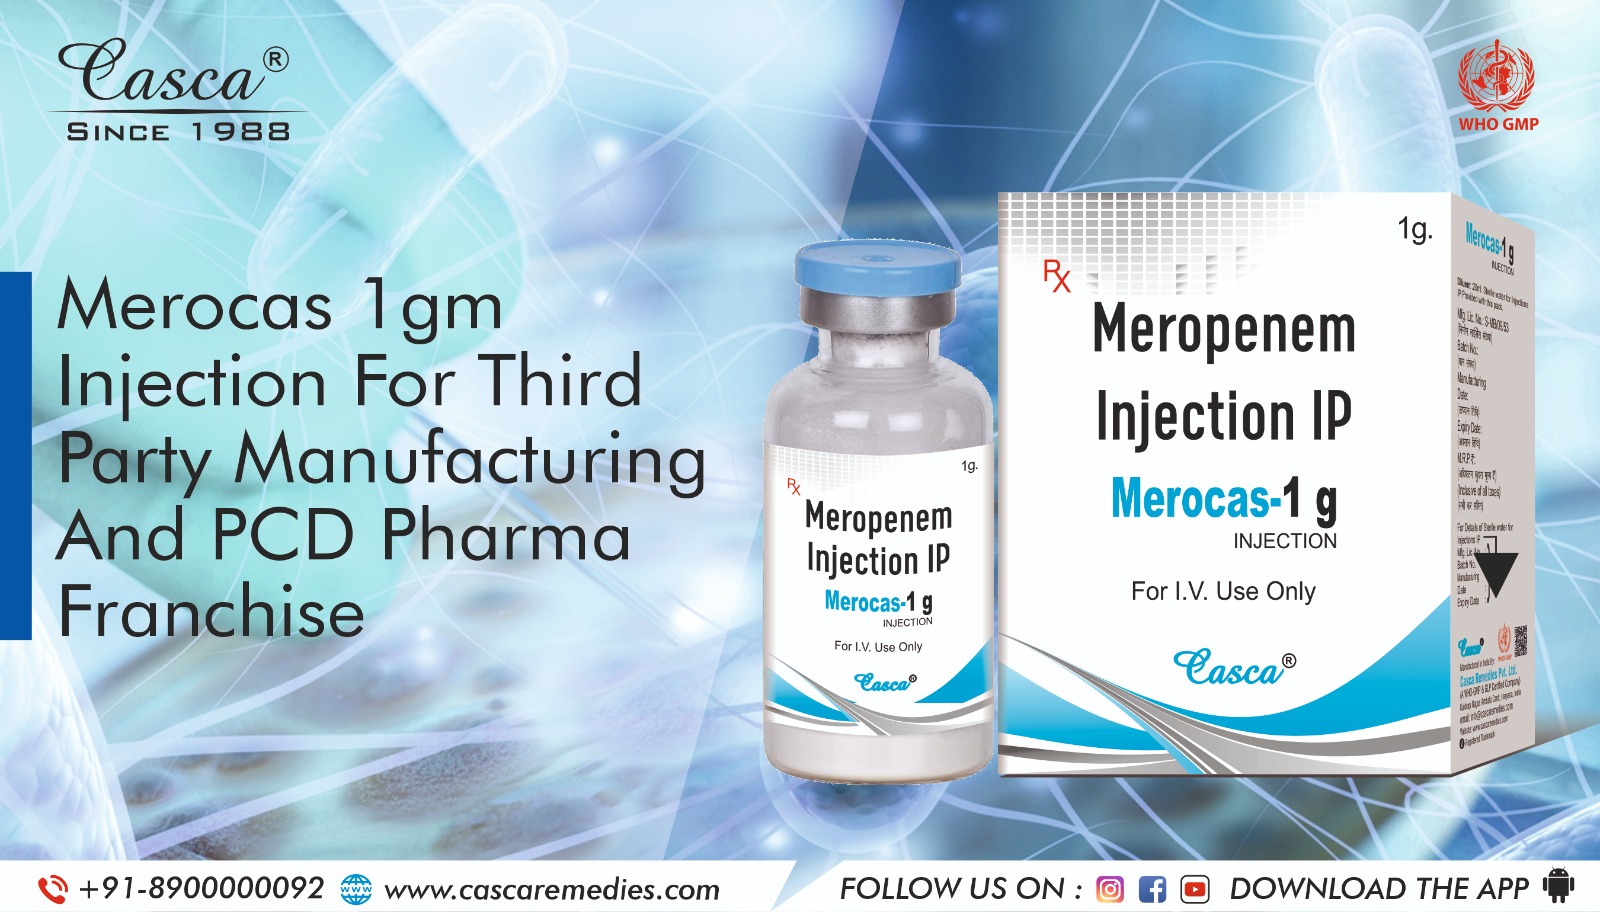 Meropenem Injection for Third Party Manufacturing and PCD Pharma Franchise